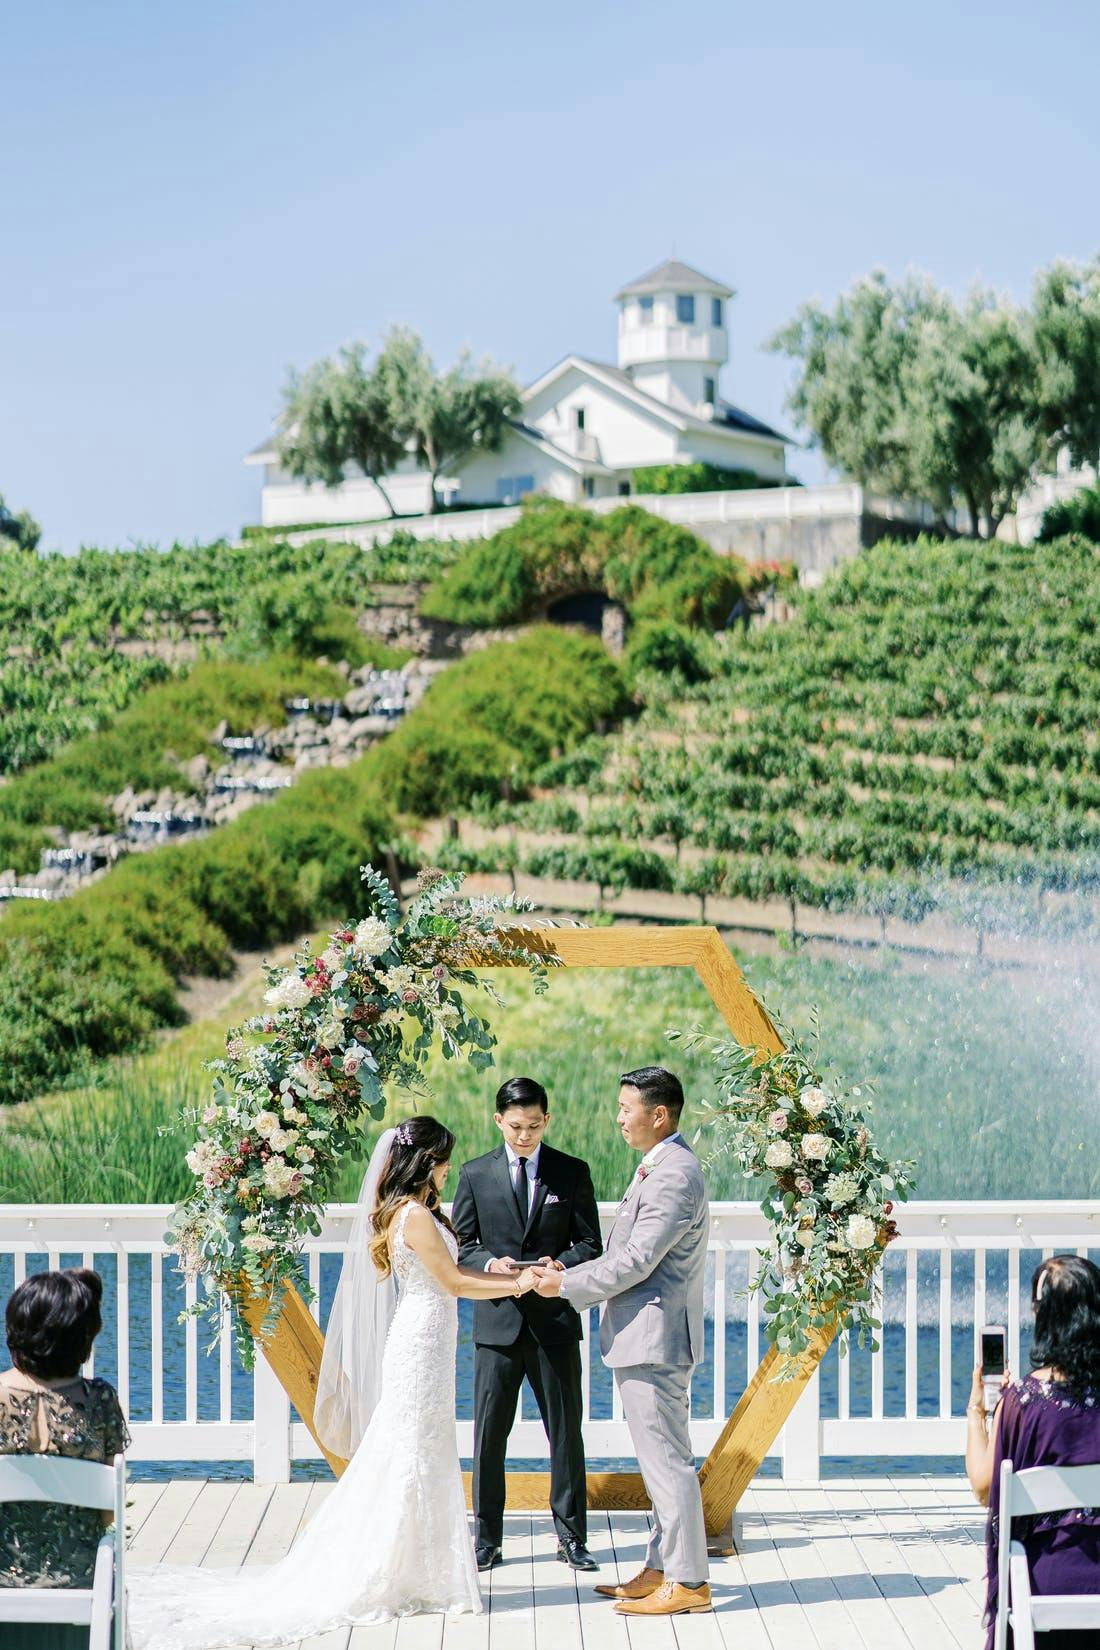 Micro wedding with a view of a California vineyard | PartySlate